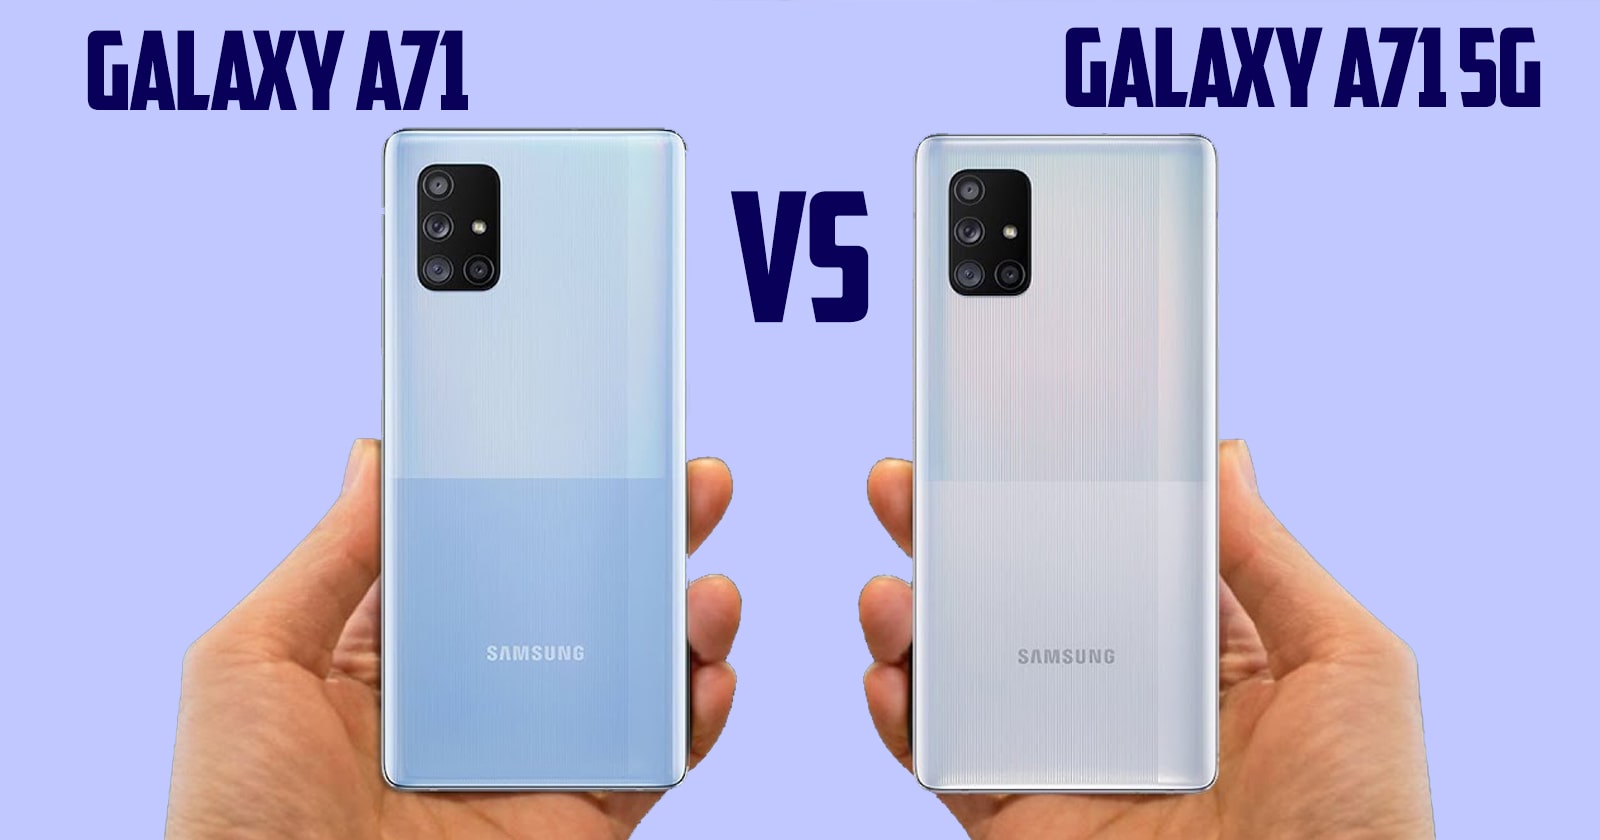 What is the difference between Samsung galaxy a71 and a71 5g?